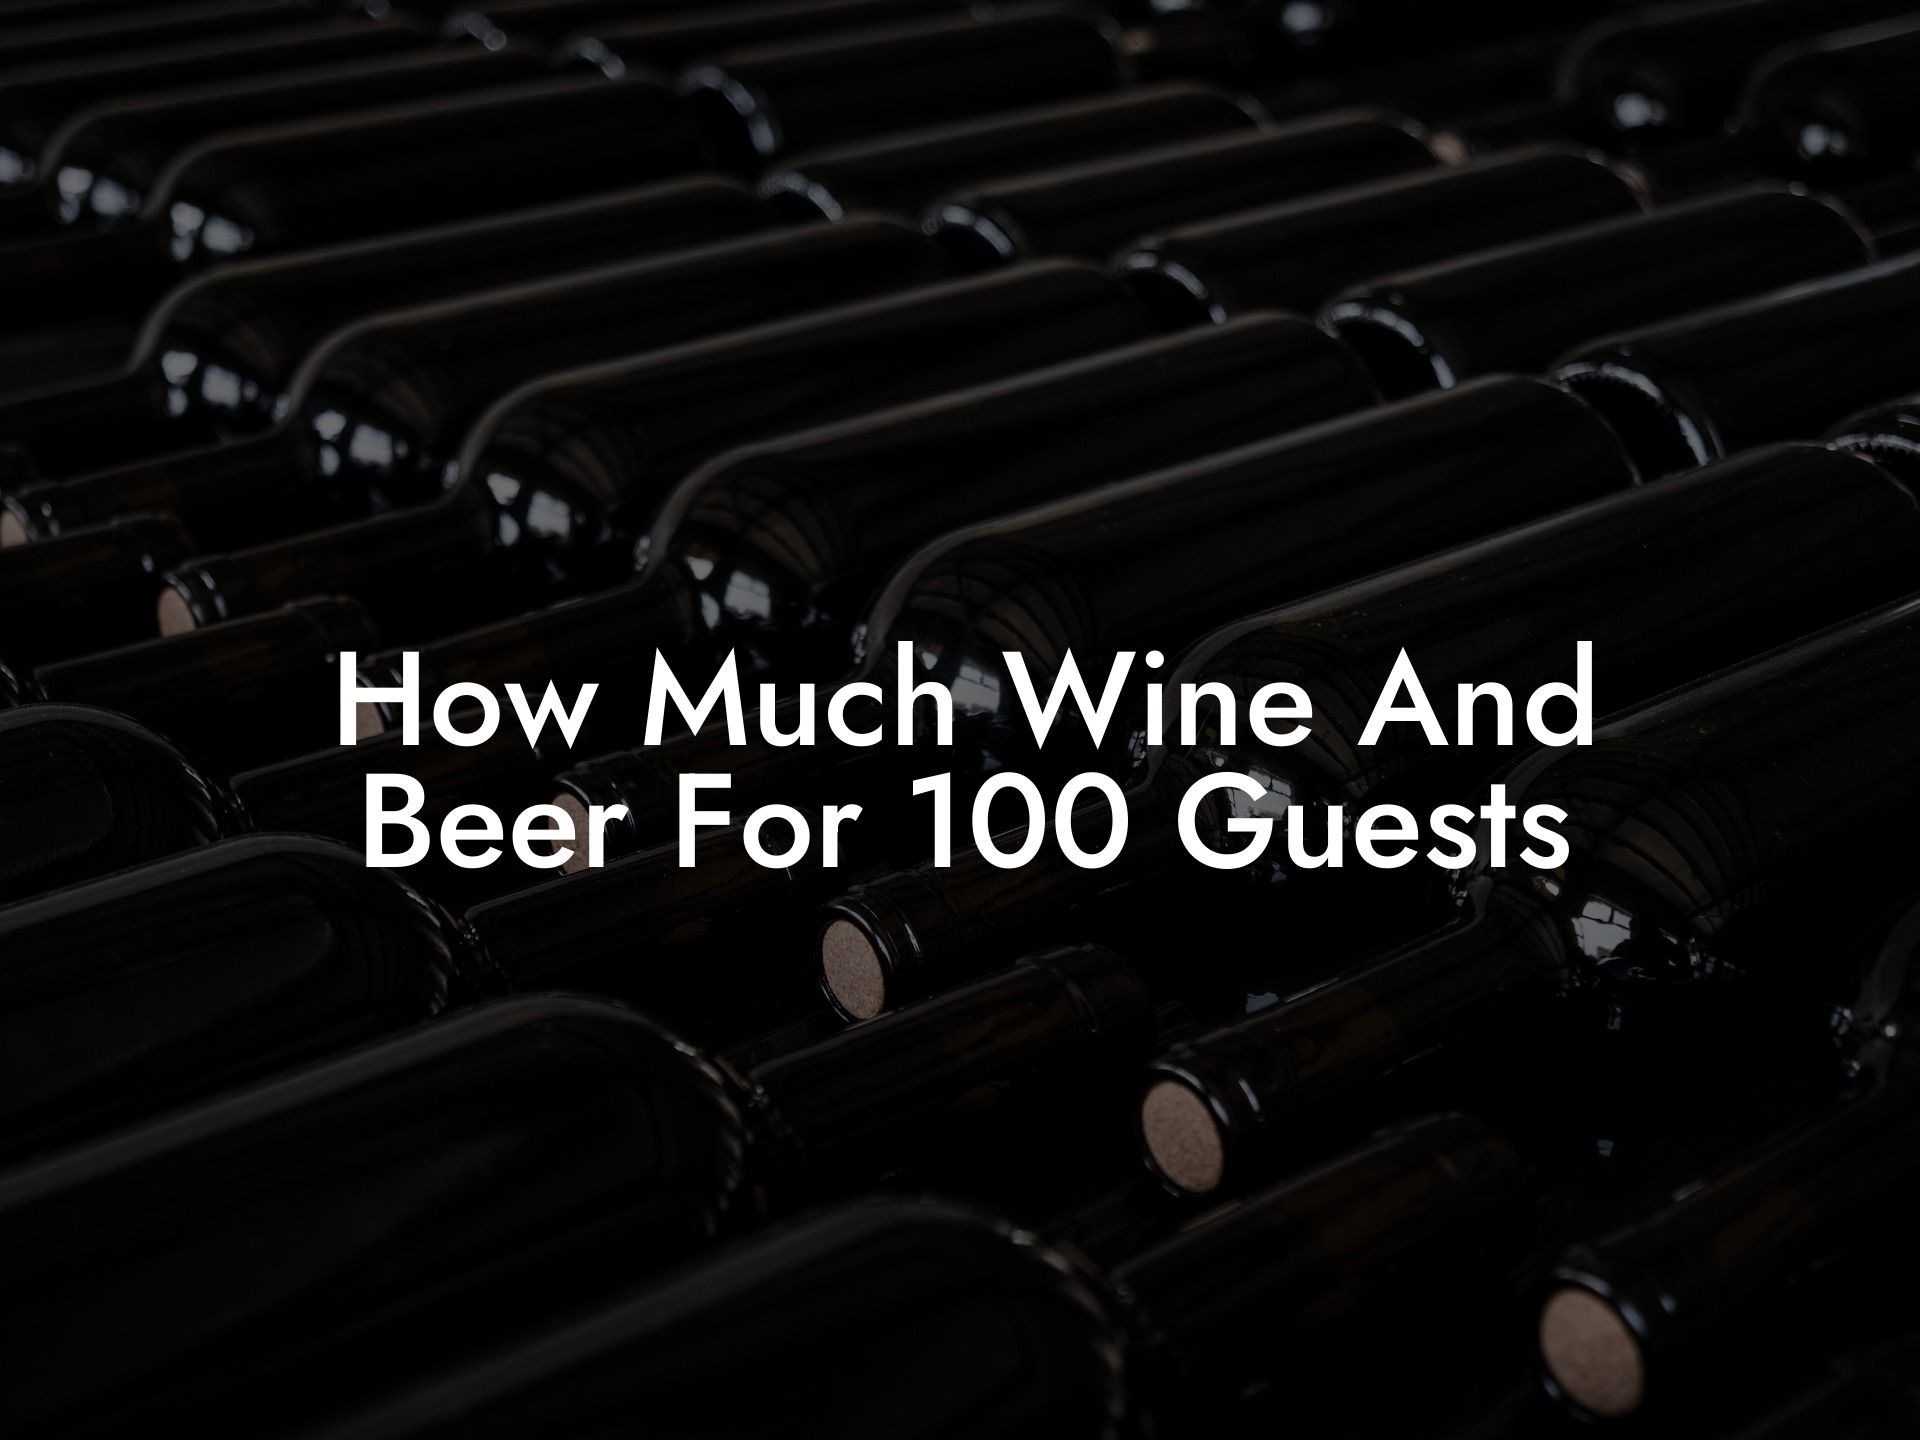 How Much Wine And Beer For 100 Guests